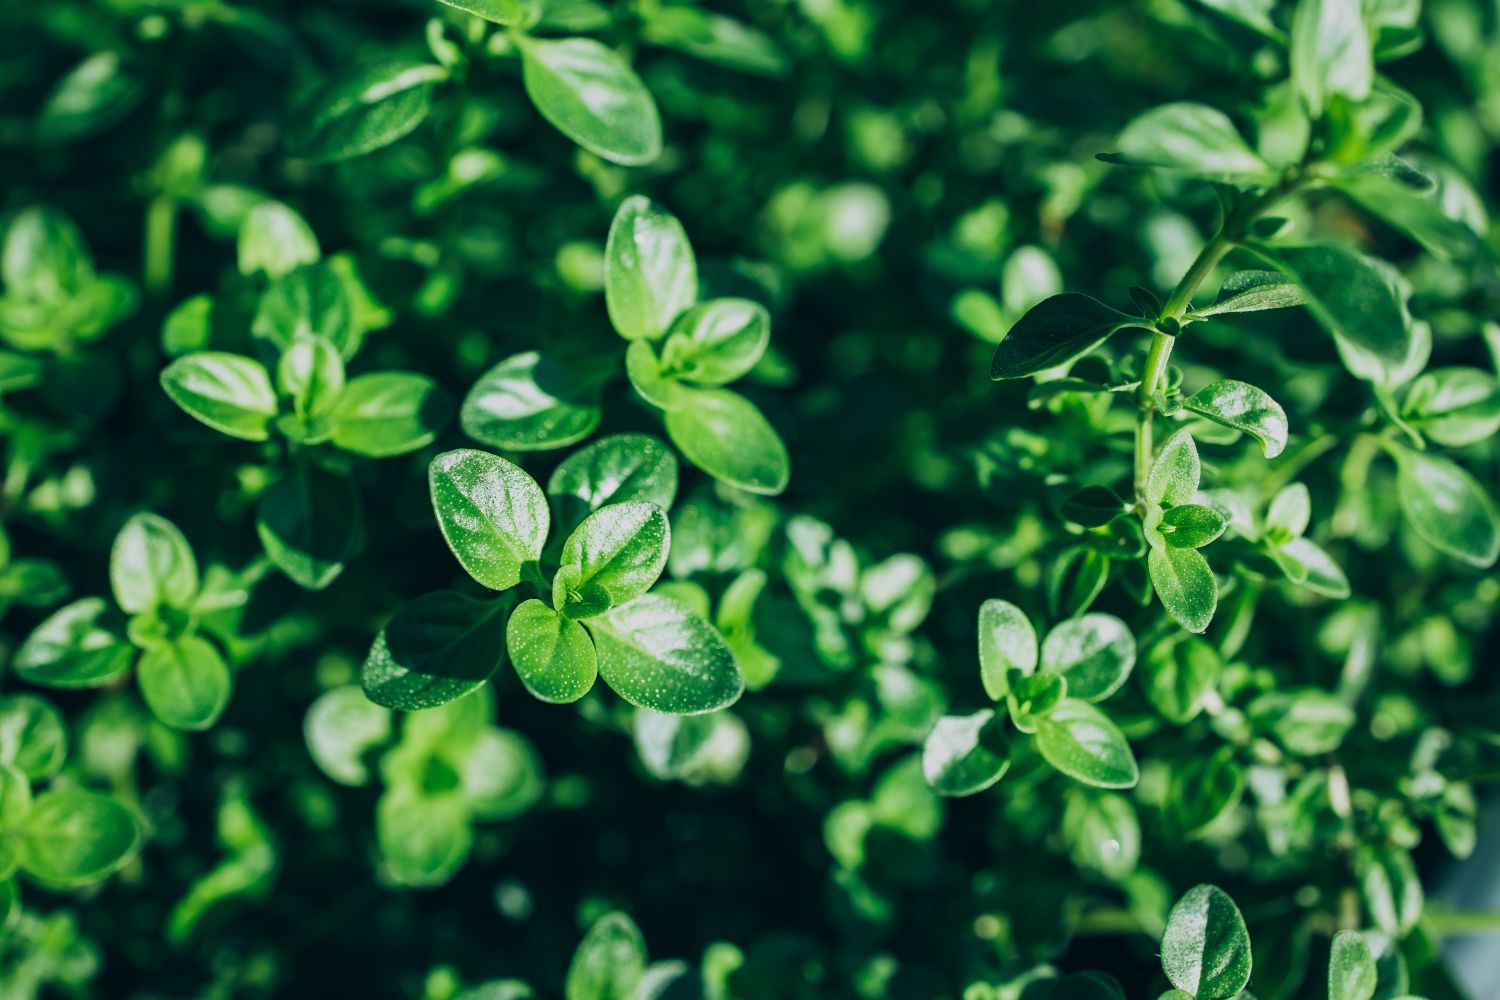 How to Identify Different Types of Thyme